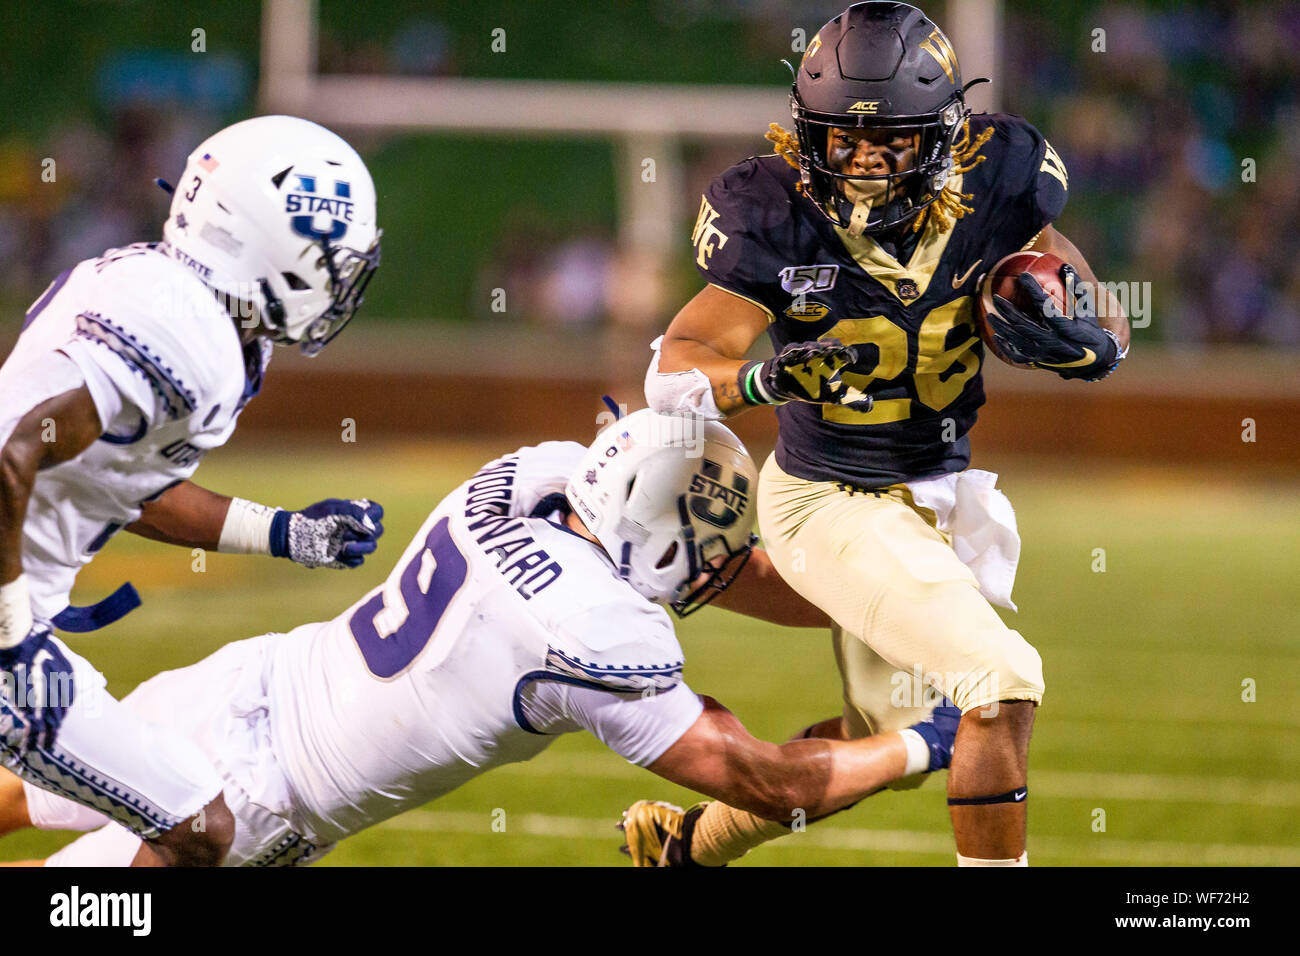 August 30, 2019: Wake Forest Demon Deacons running back Christian Beal-Smith (26) breaks free from Utah State Aggies linebacker David Woodward (9) for a touchdown in the third quarter of the NCAA matchup at BB&T Field in Winston-Salem, NC. (Scott Kinser/Cal Sport Media) Stock Photo